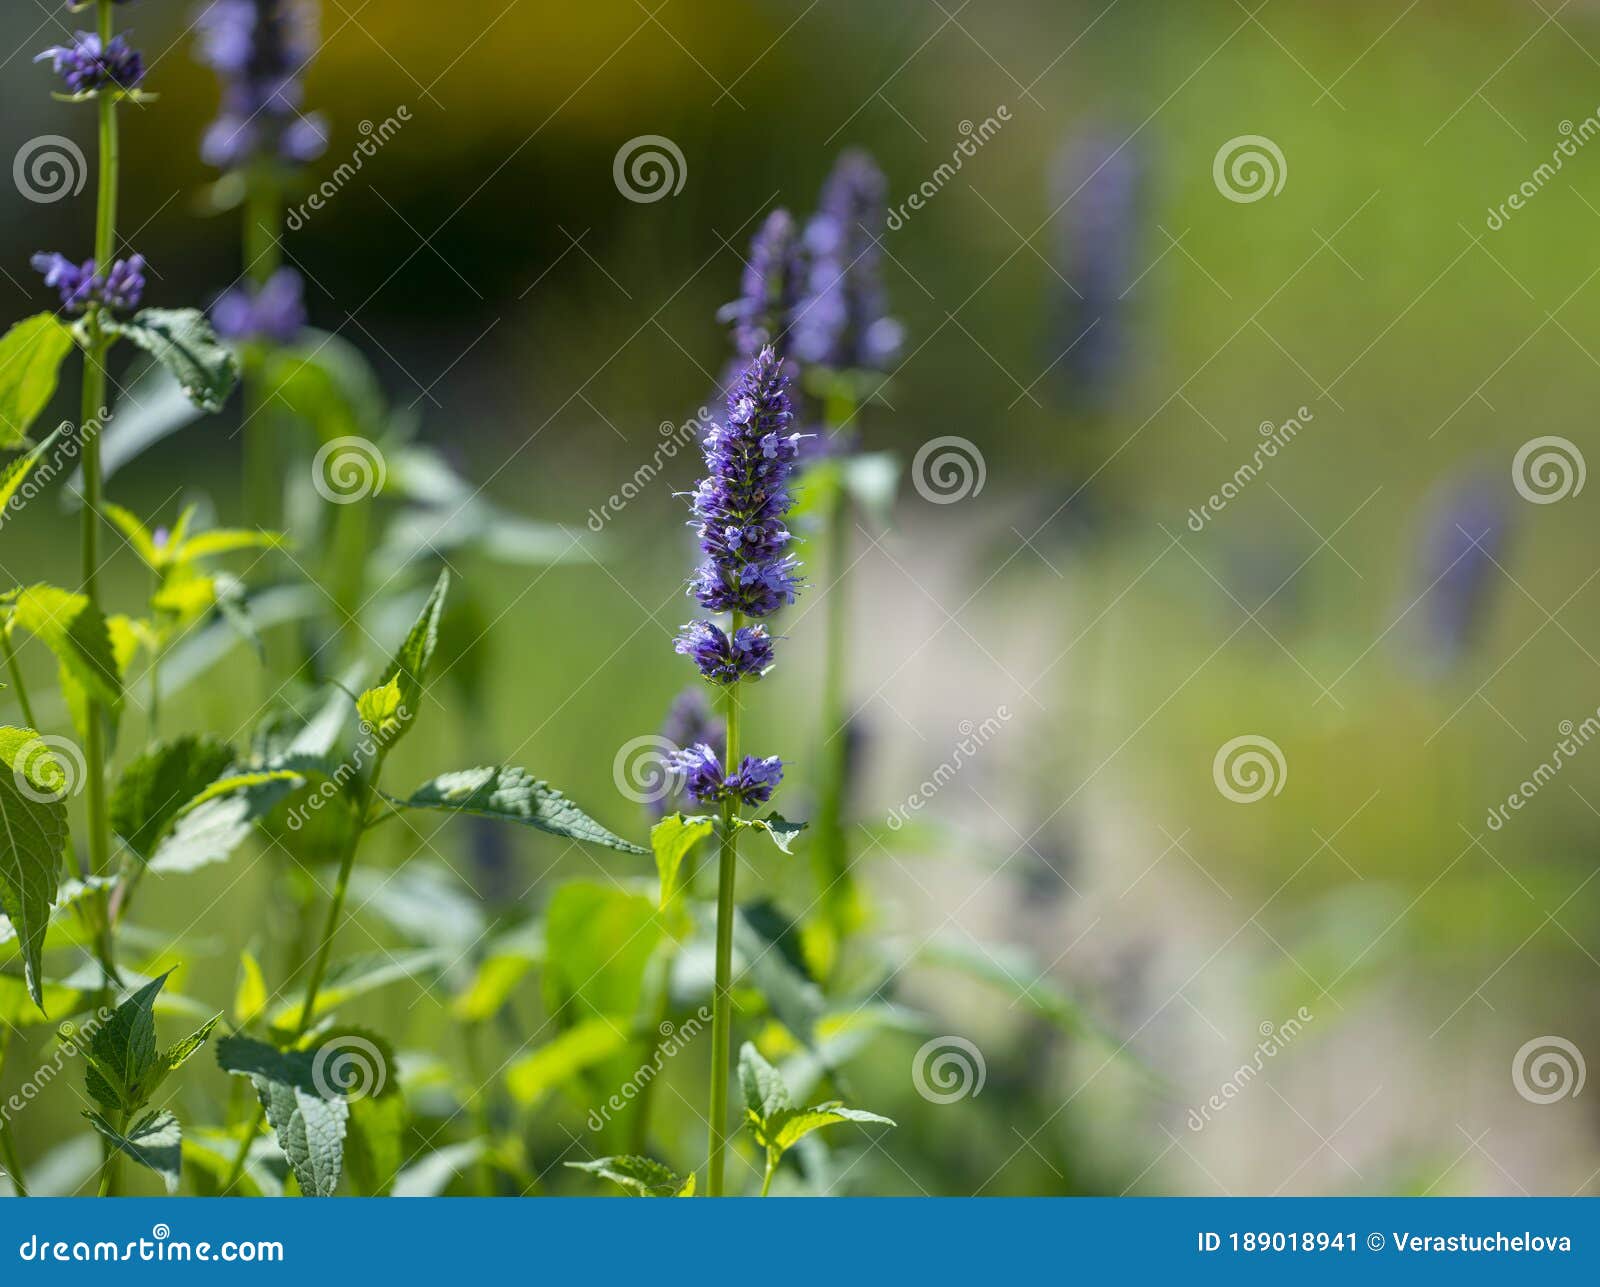 Agastache Foeniculum Herb in Garden Stock Image - Image of foliage ...